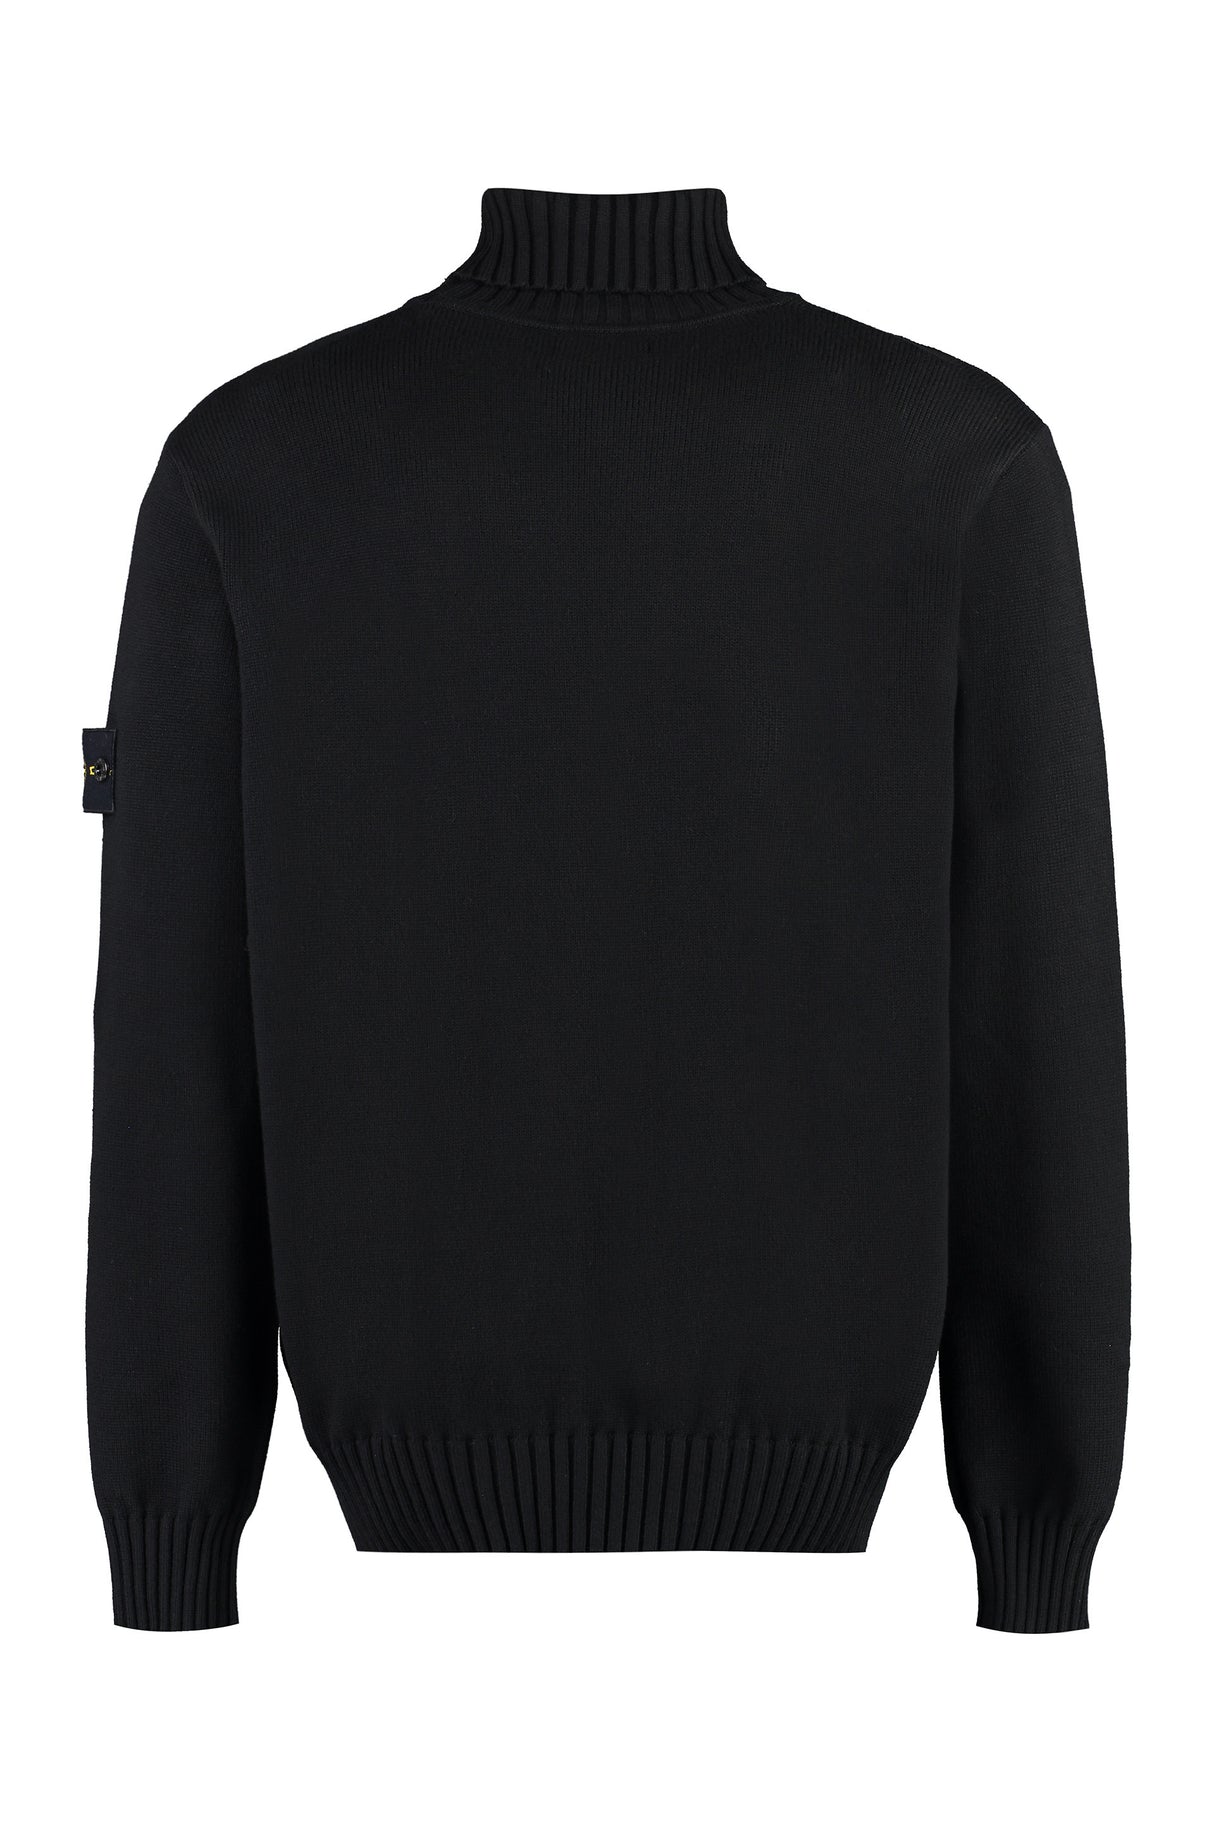 STONE ISLAND MEN'S BLACK COTTON-BLEND SWEATER WITH REMOVABLE LOGO PATCH - FW23